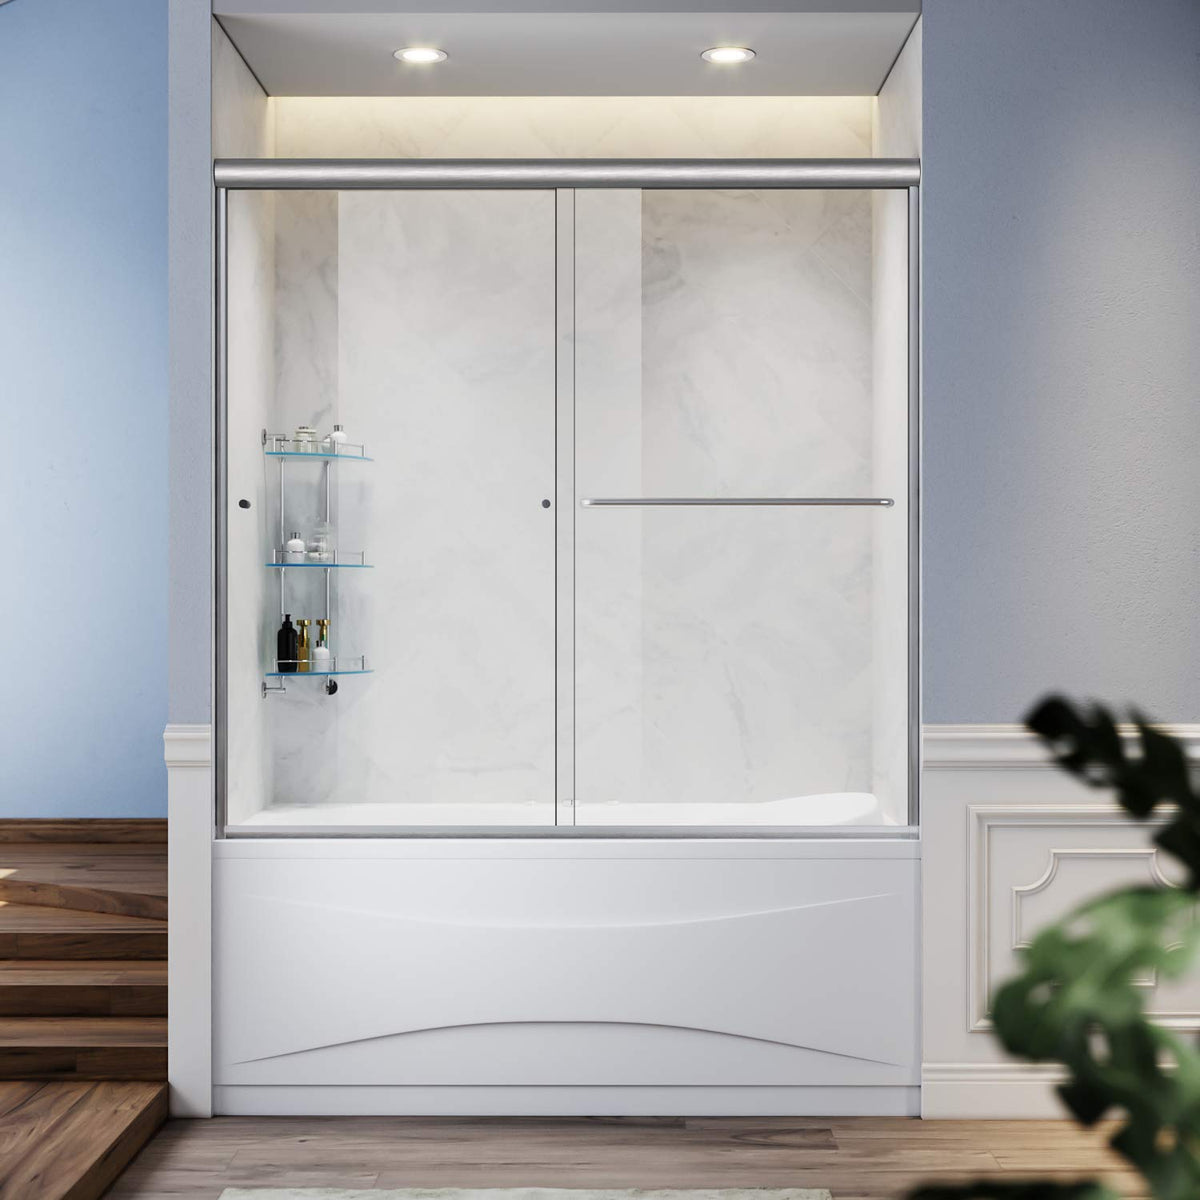 SUNNY SHOWER 60 in. W x 57.4 in. H Brushed Nickel Finish Bathtub Double Sliding Doors